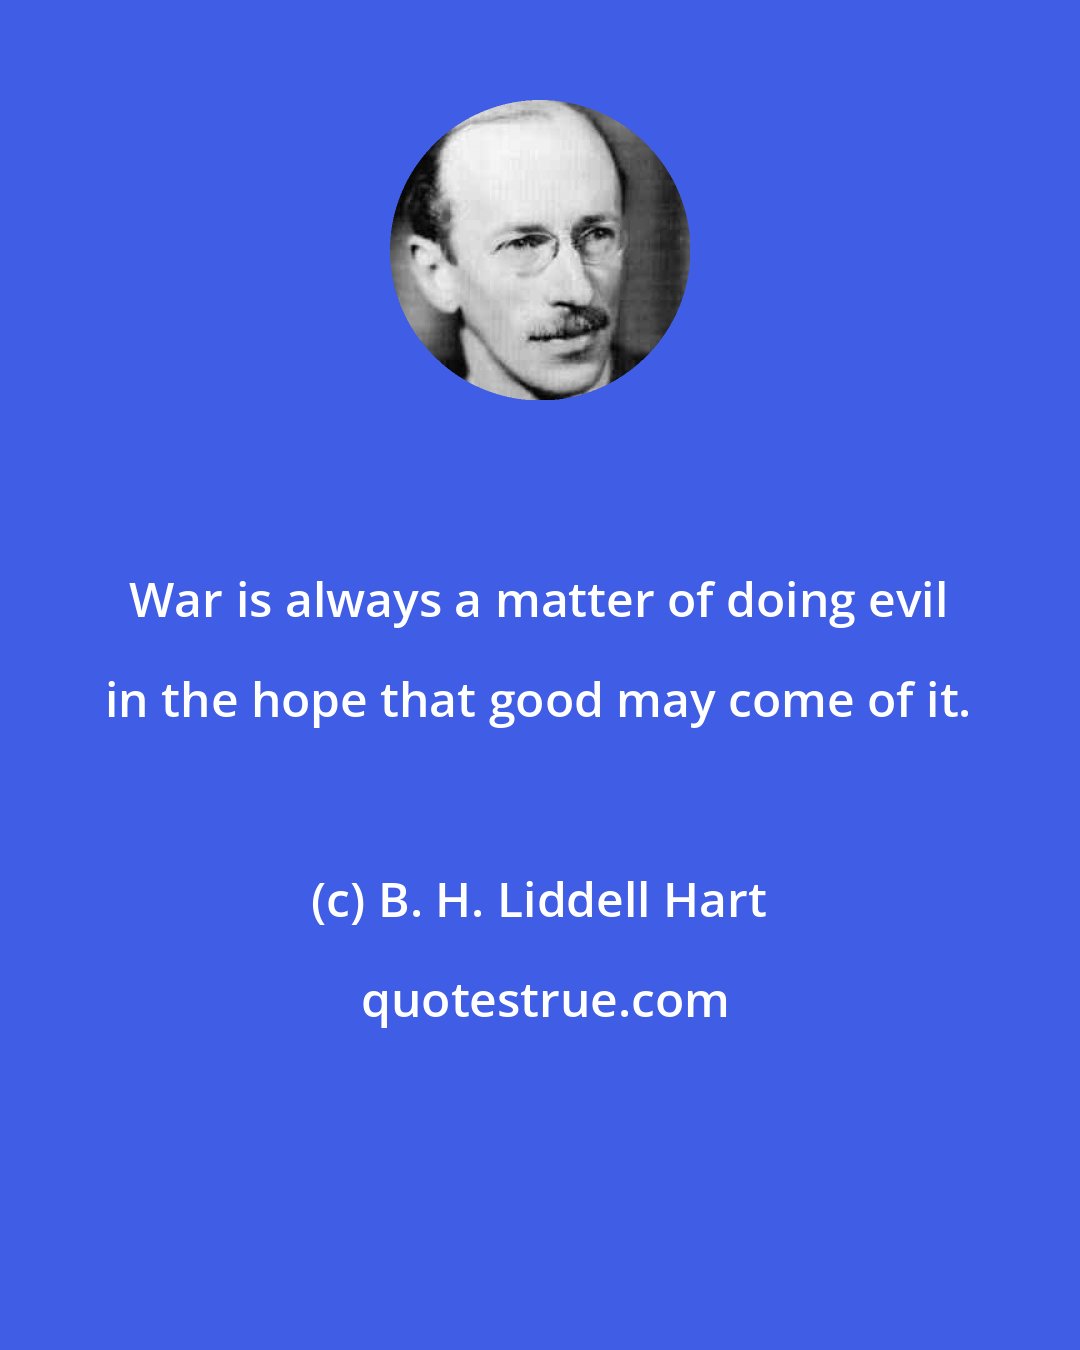 B. H. Liddell Hart: War is always a matter of doing evil in the hope that good may come of it.